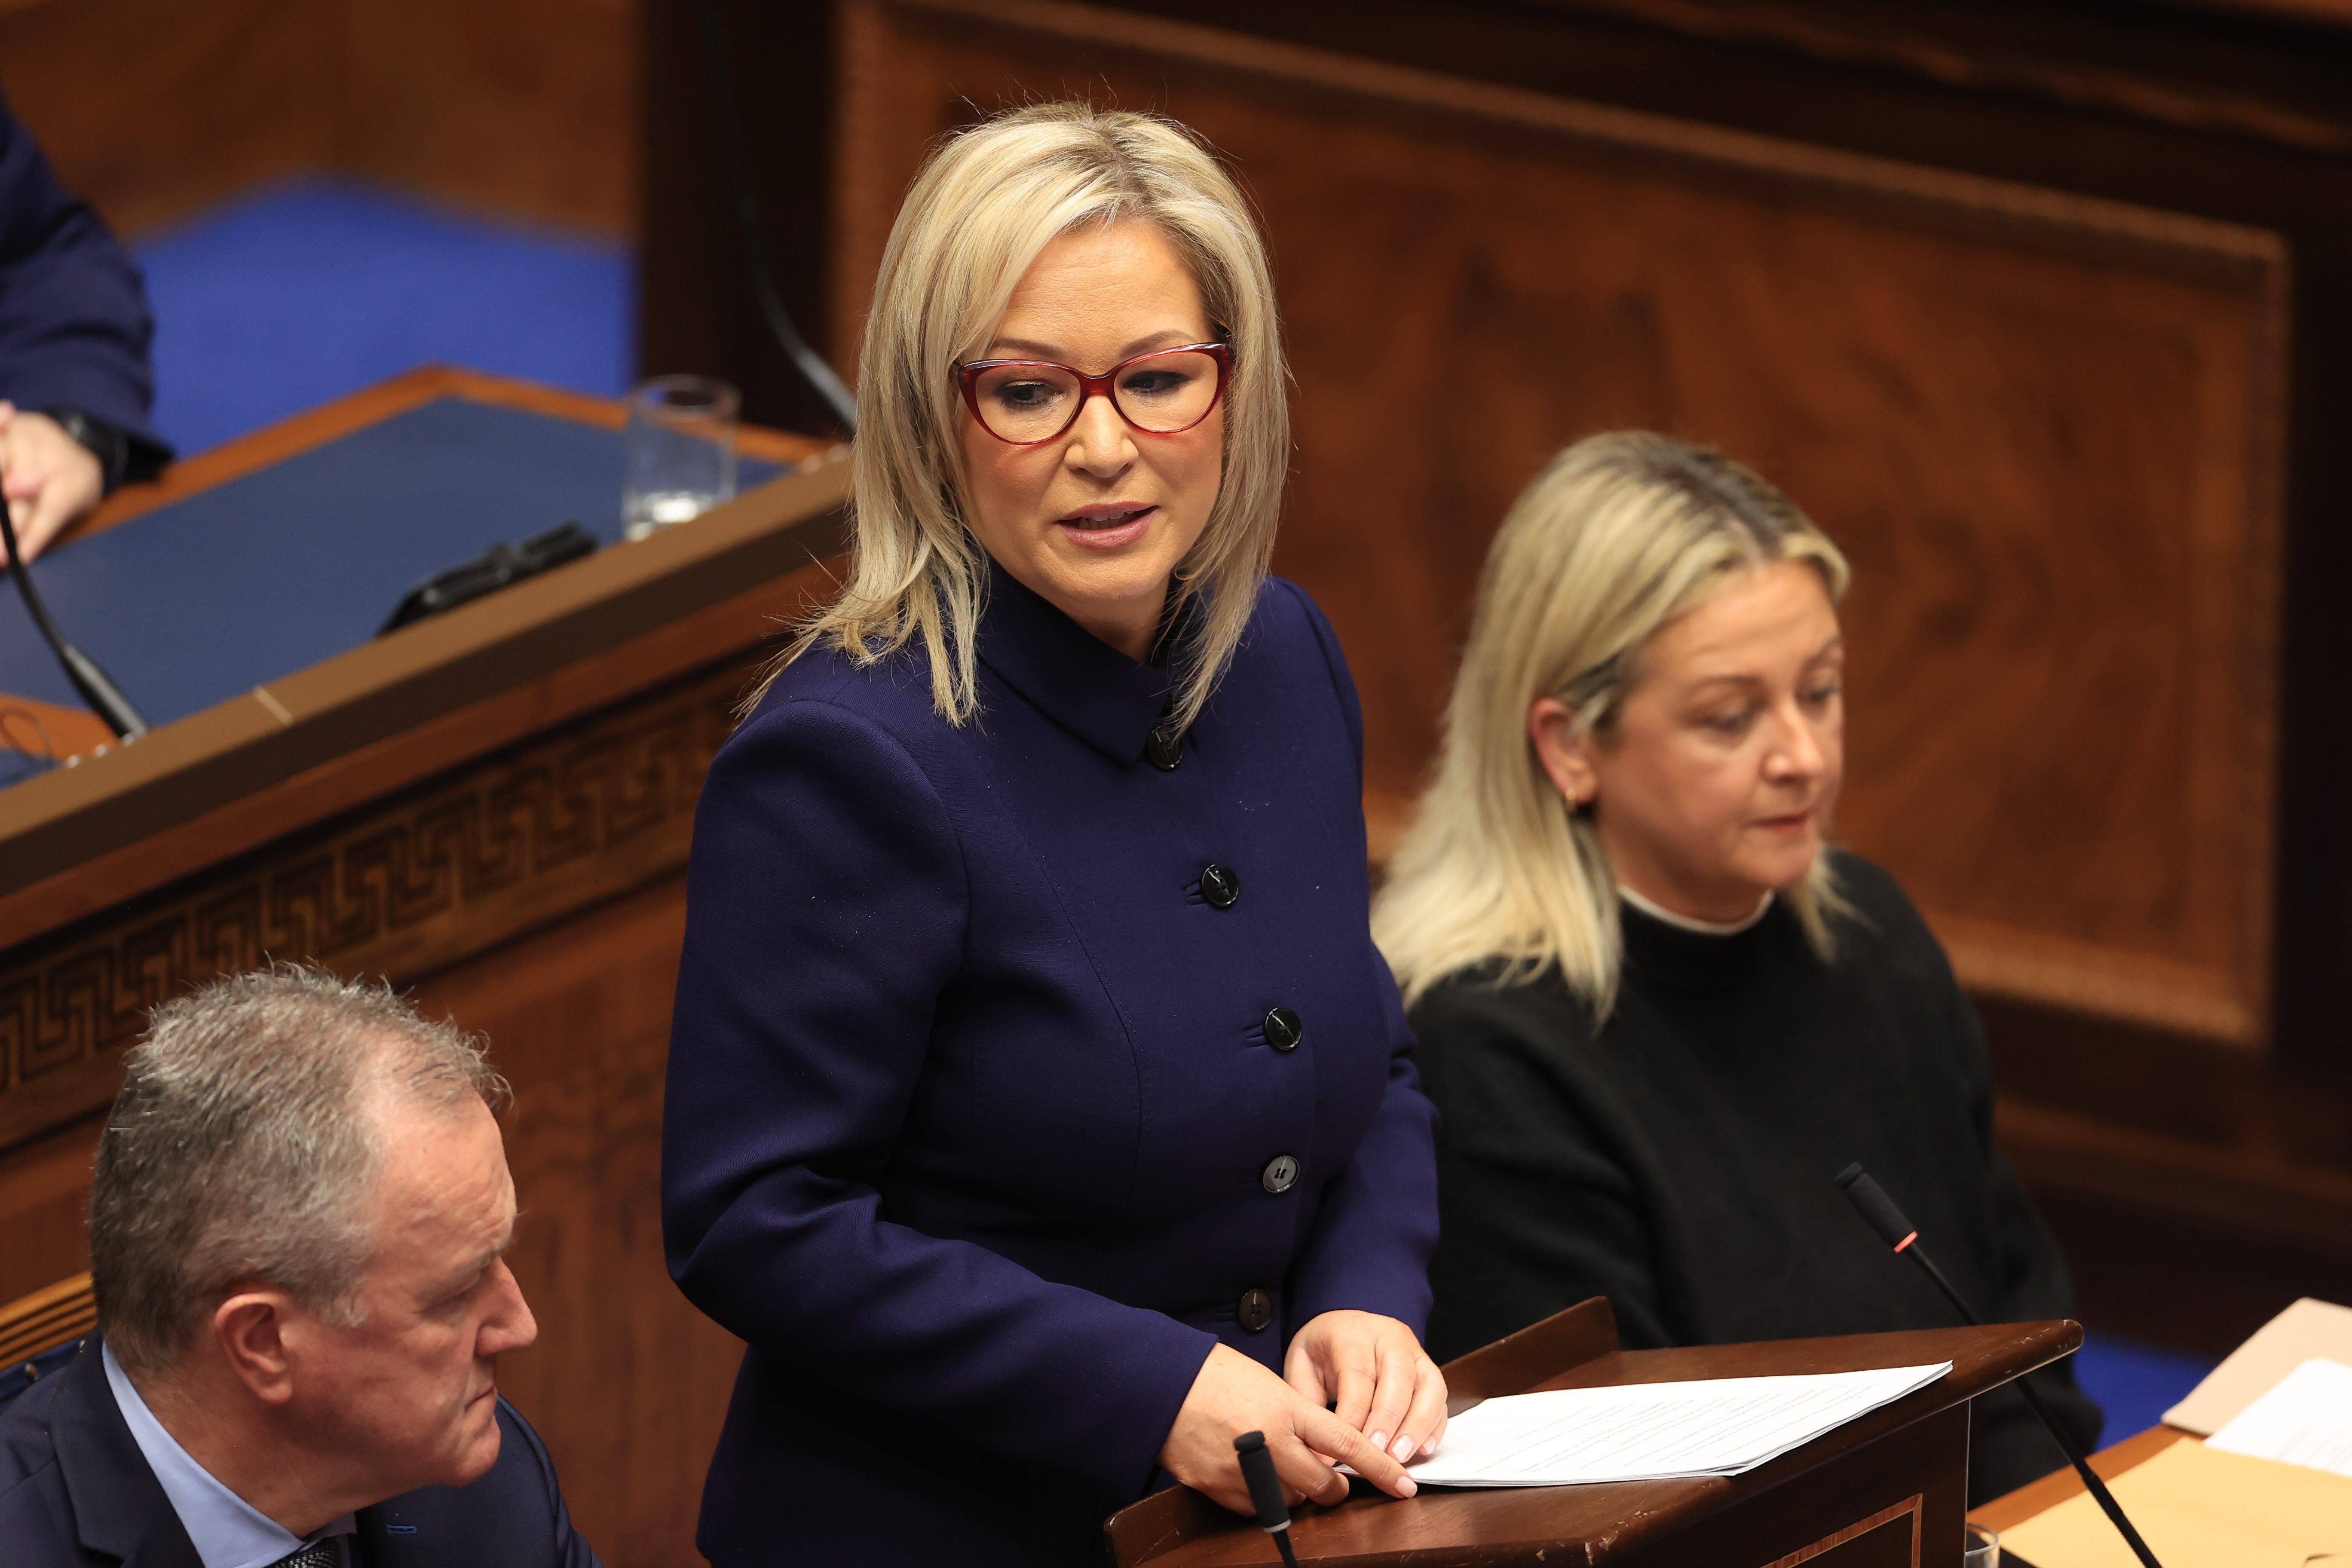 Historic Return of Power-Sharing in Northern Ireland as Sinn Fein's Michelle O'Neill Takes Helm